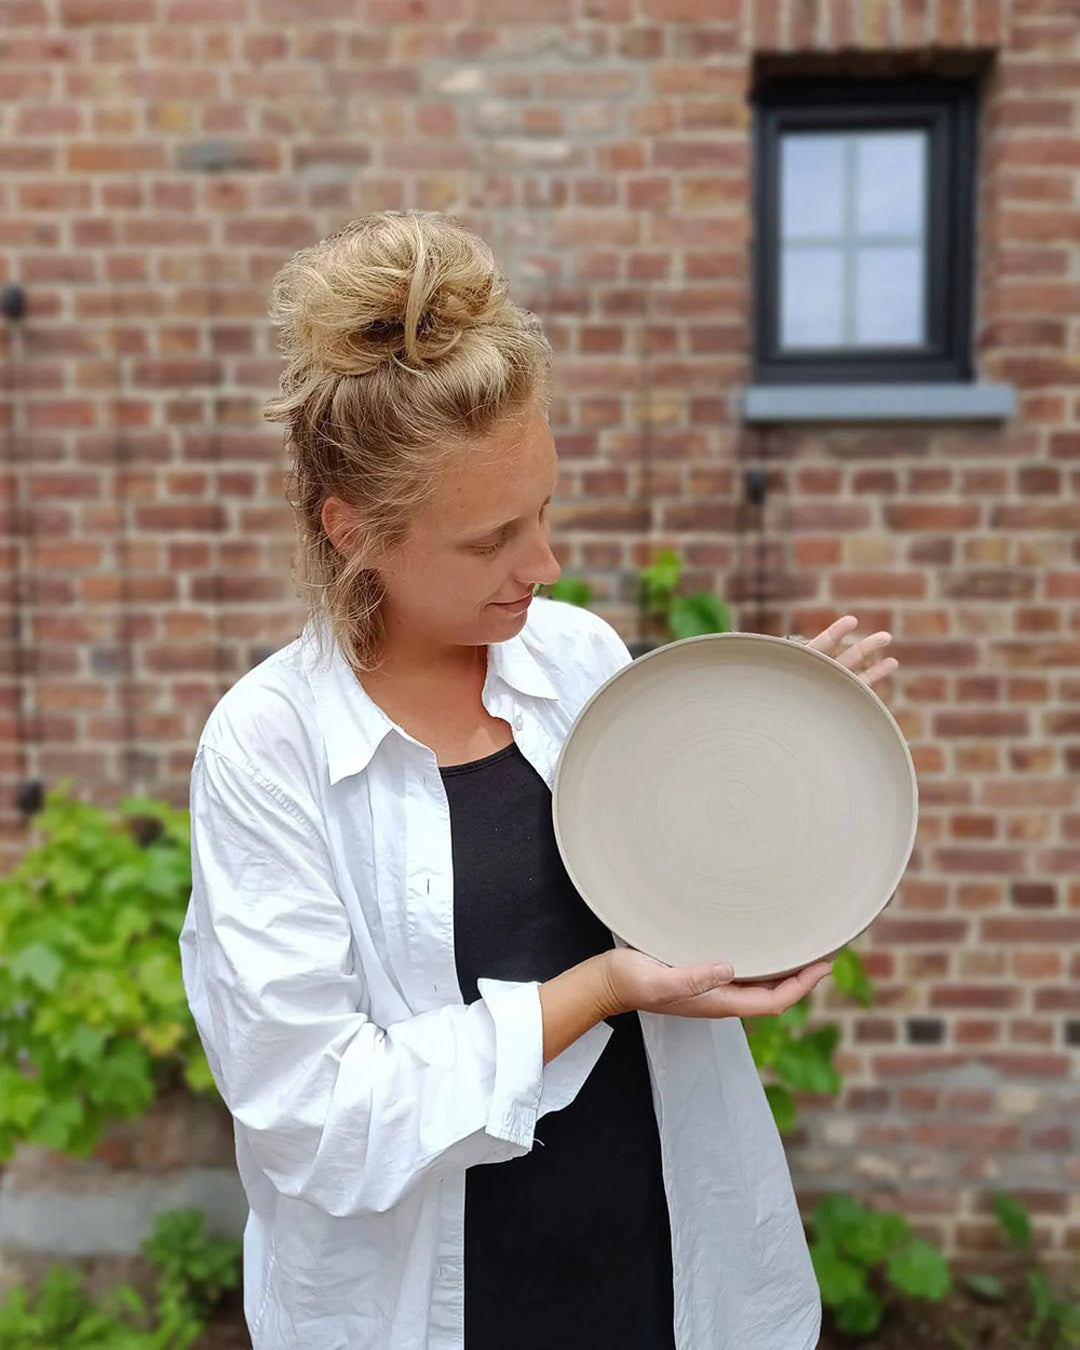 Andrea admires a freshly crafted ceramic plate in her studio